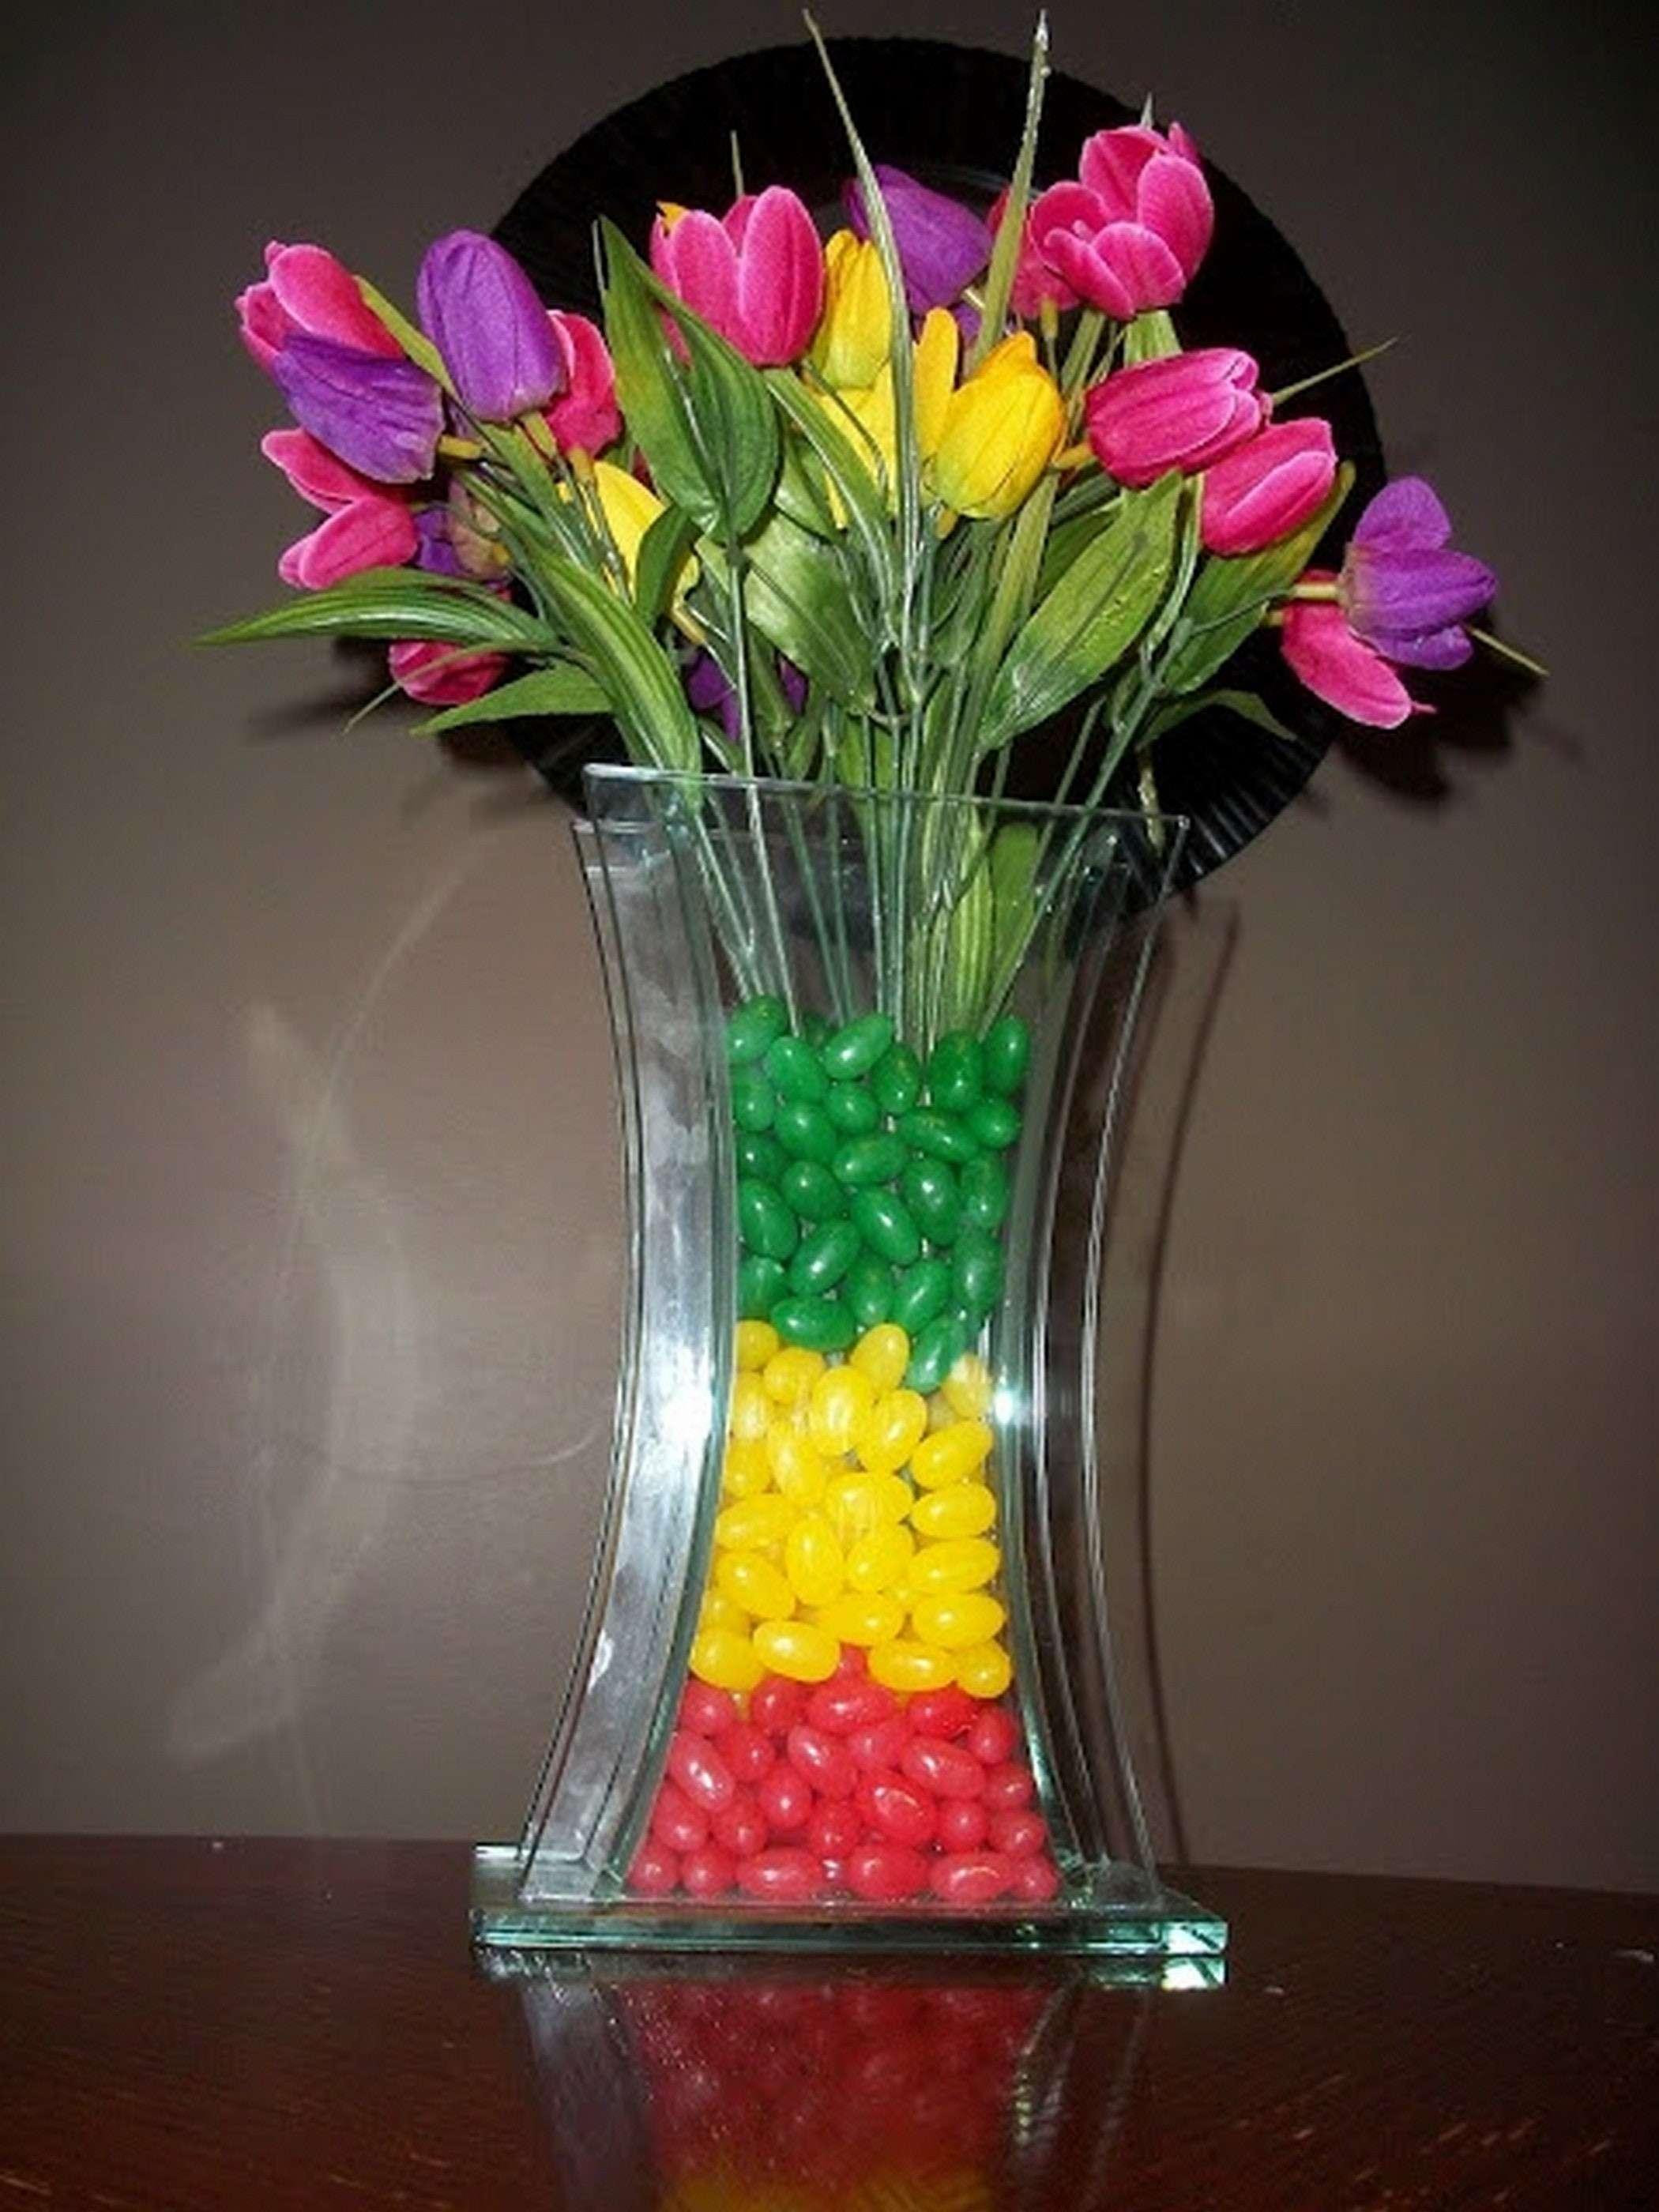 how to make floating flowers in vase of diy craft ideas best of 15 cheap and easy diy vase filler ideas 3h with regard to diy craft ideas best of 15 cheap and easy diy vase filler ideas 3h vases flower